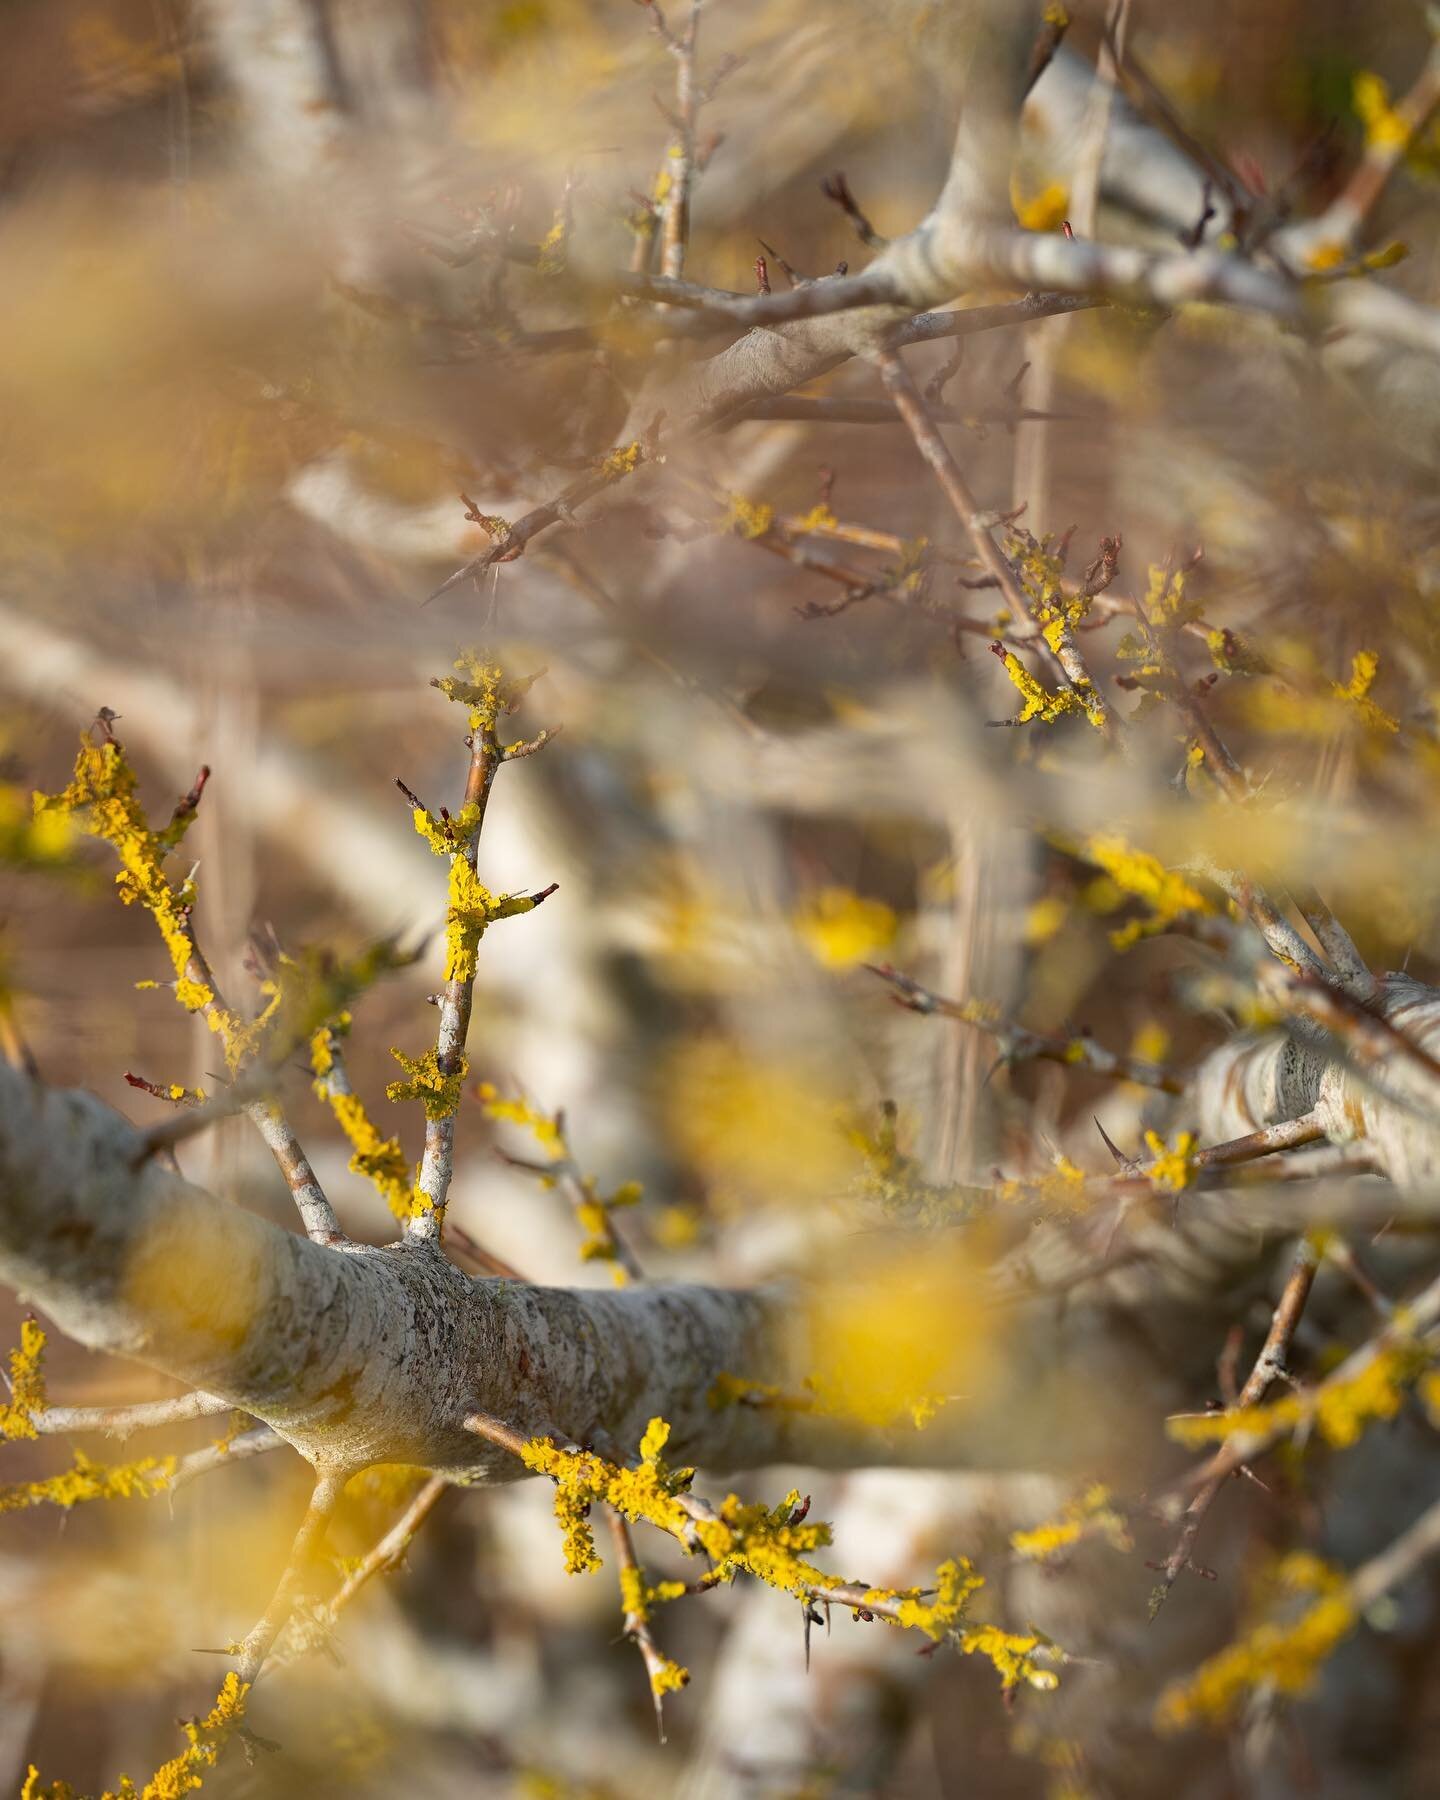 Crisp winter light over the weekend bringing focus to the subtleties of nature, with it&rsquo;s beautiful skeletal forms &amp; layers of rich colour 

1 | Acid yellow lichen on the branches of Hawthorn
2 | Bramble leaves filtering light like stained 